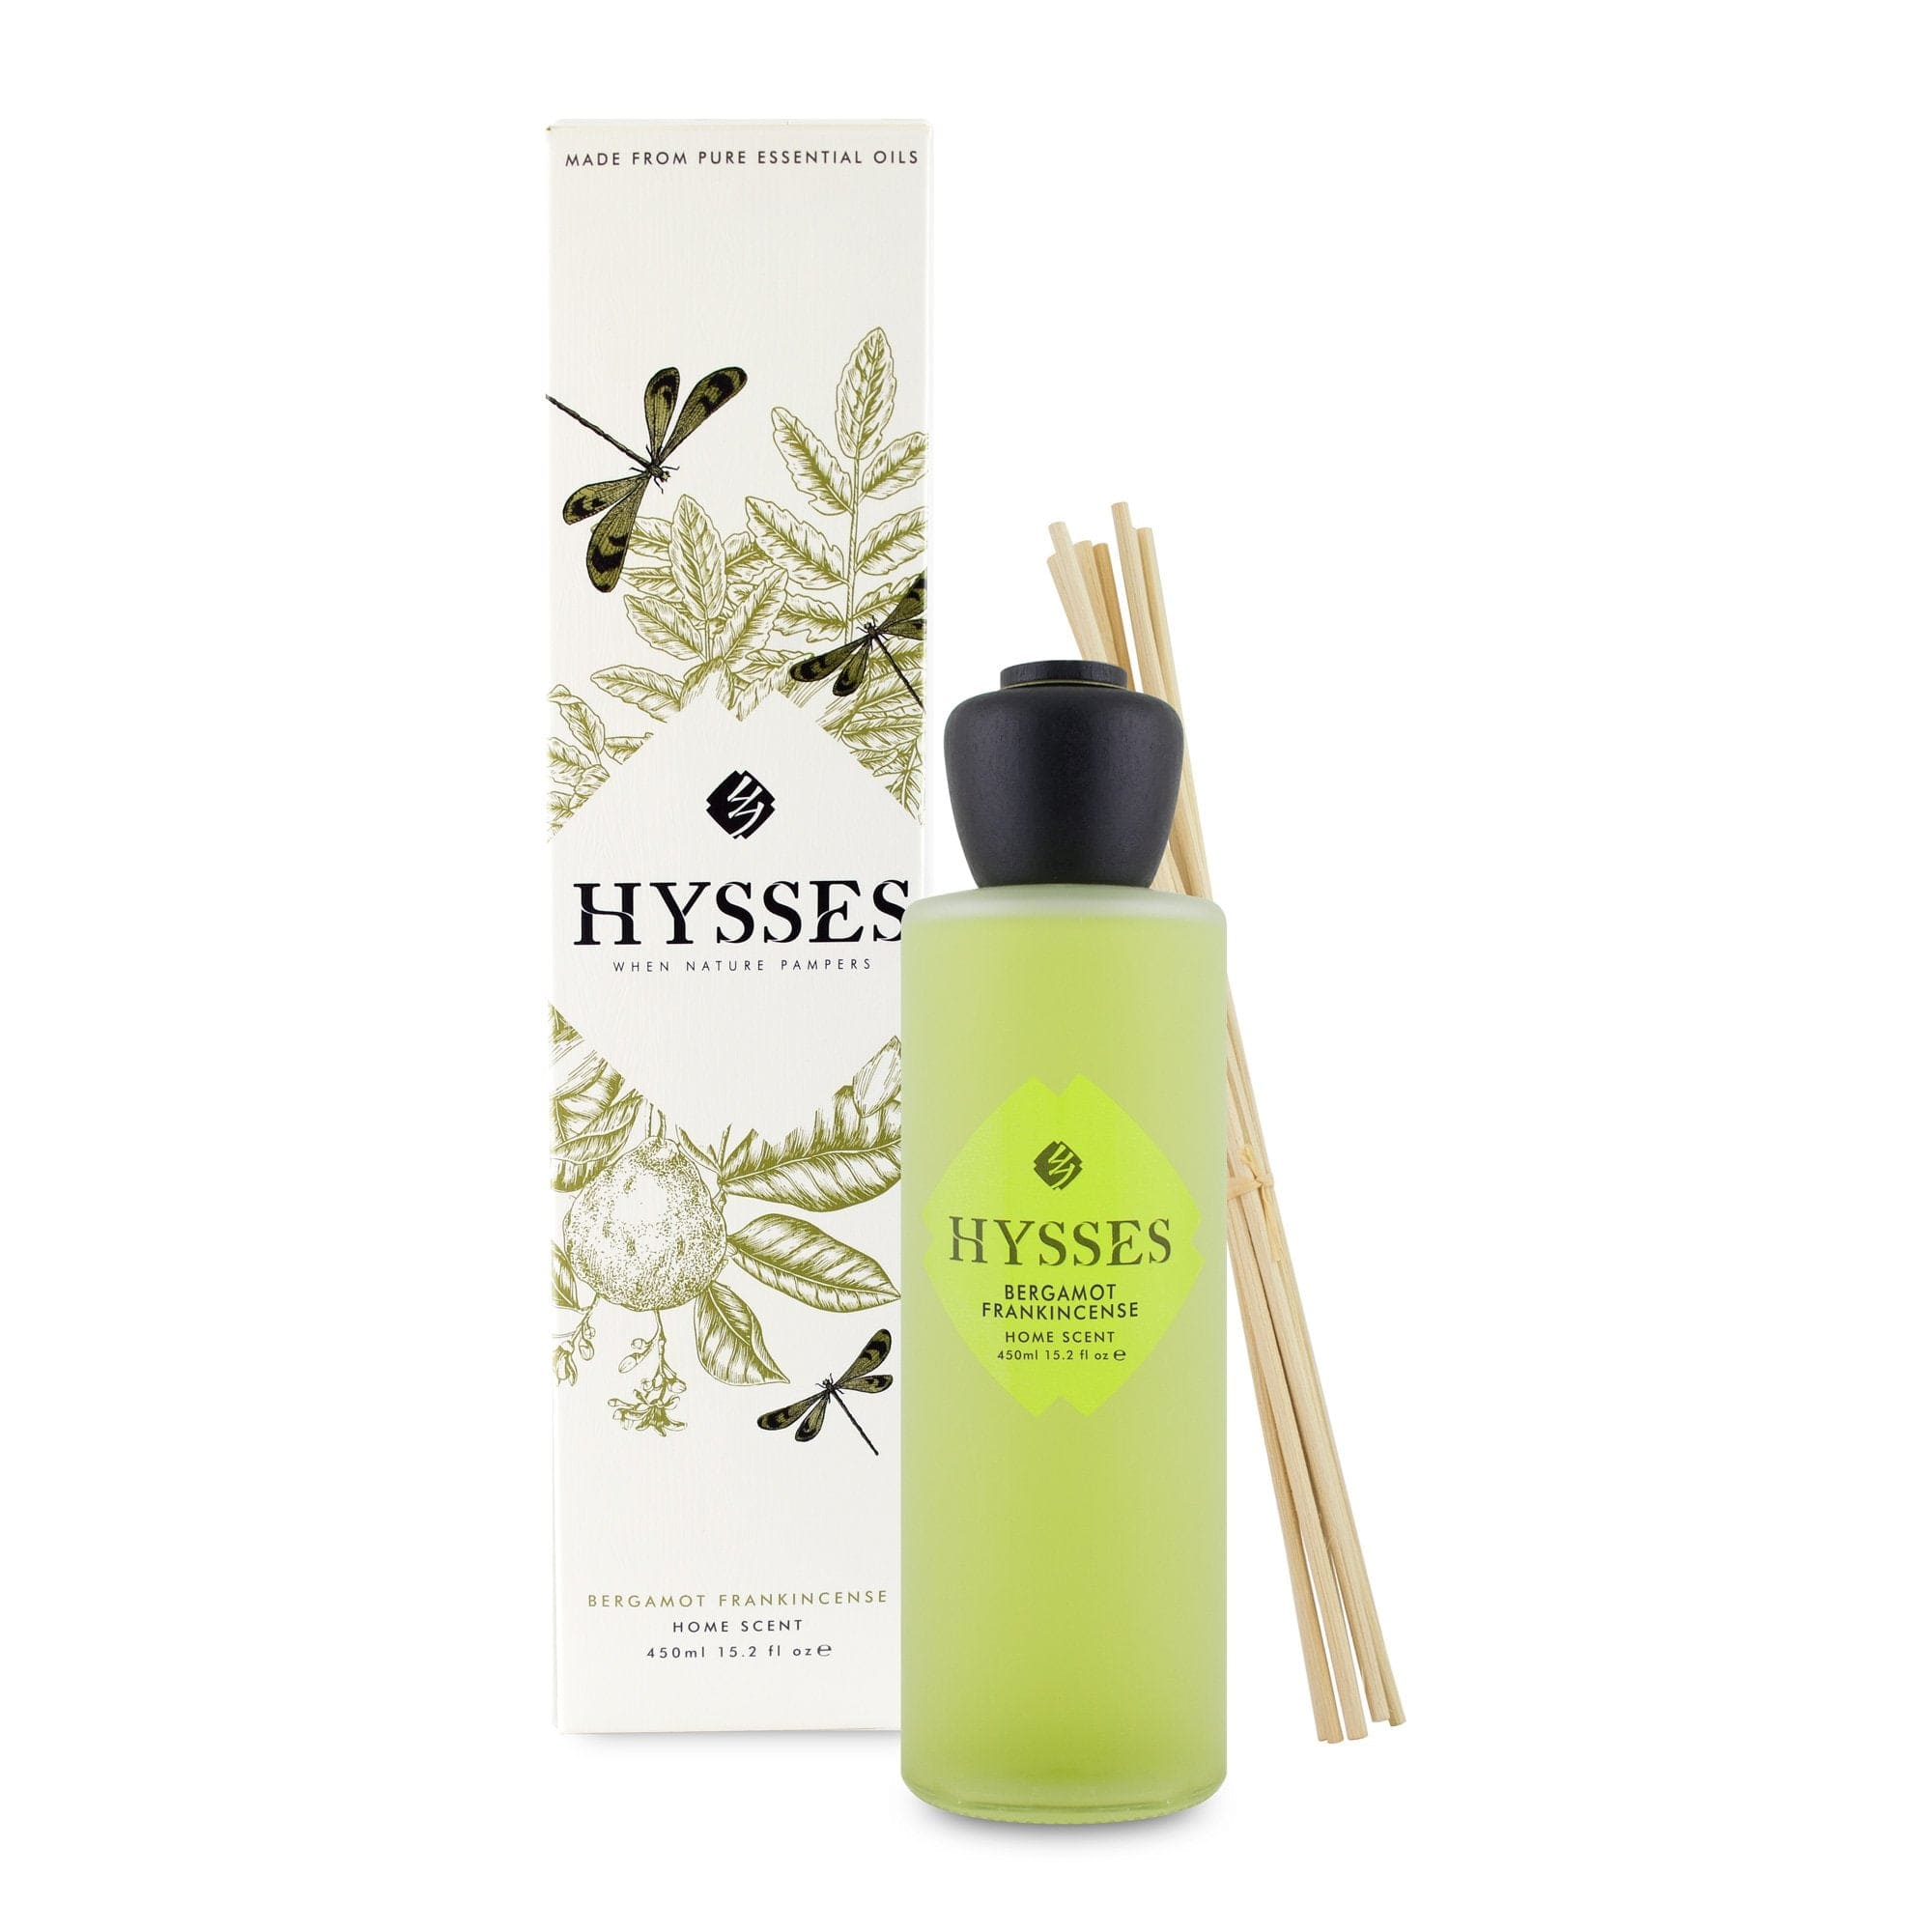 Hysses Home Scents 450ml Home Scent Reed Diffuser Bergamot Frankincense, 450ML